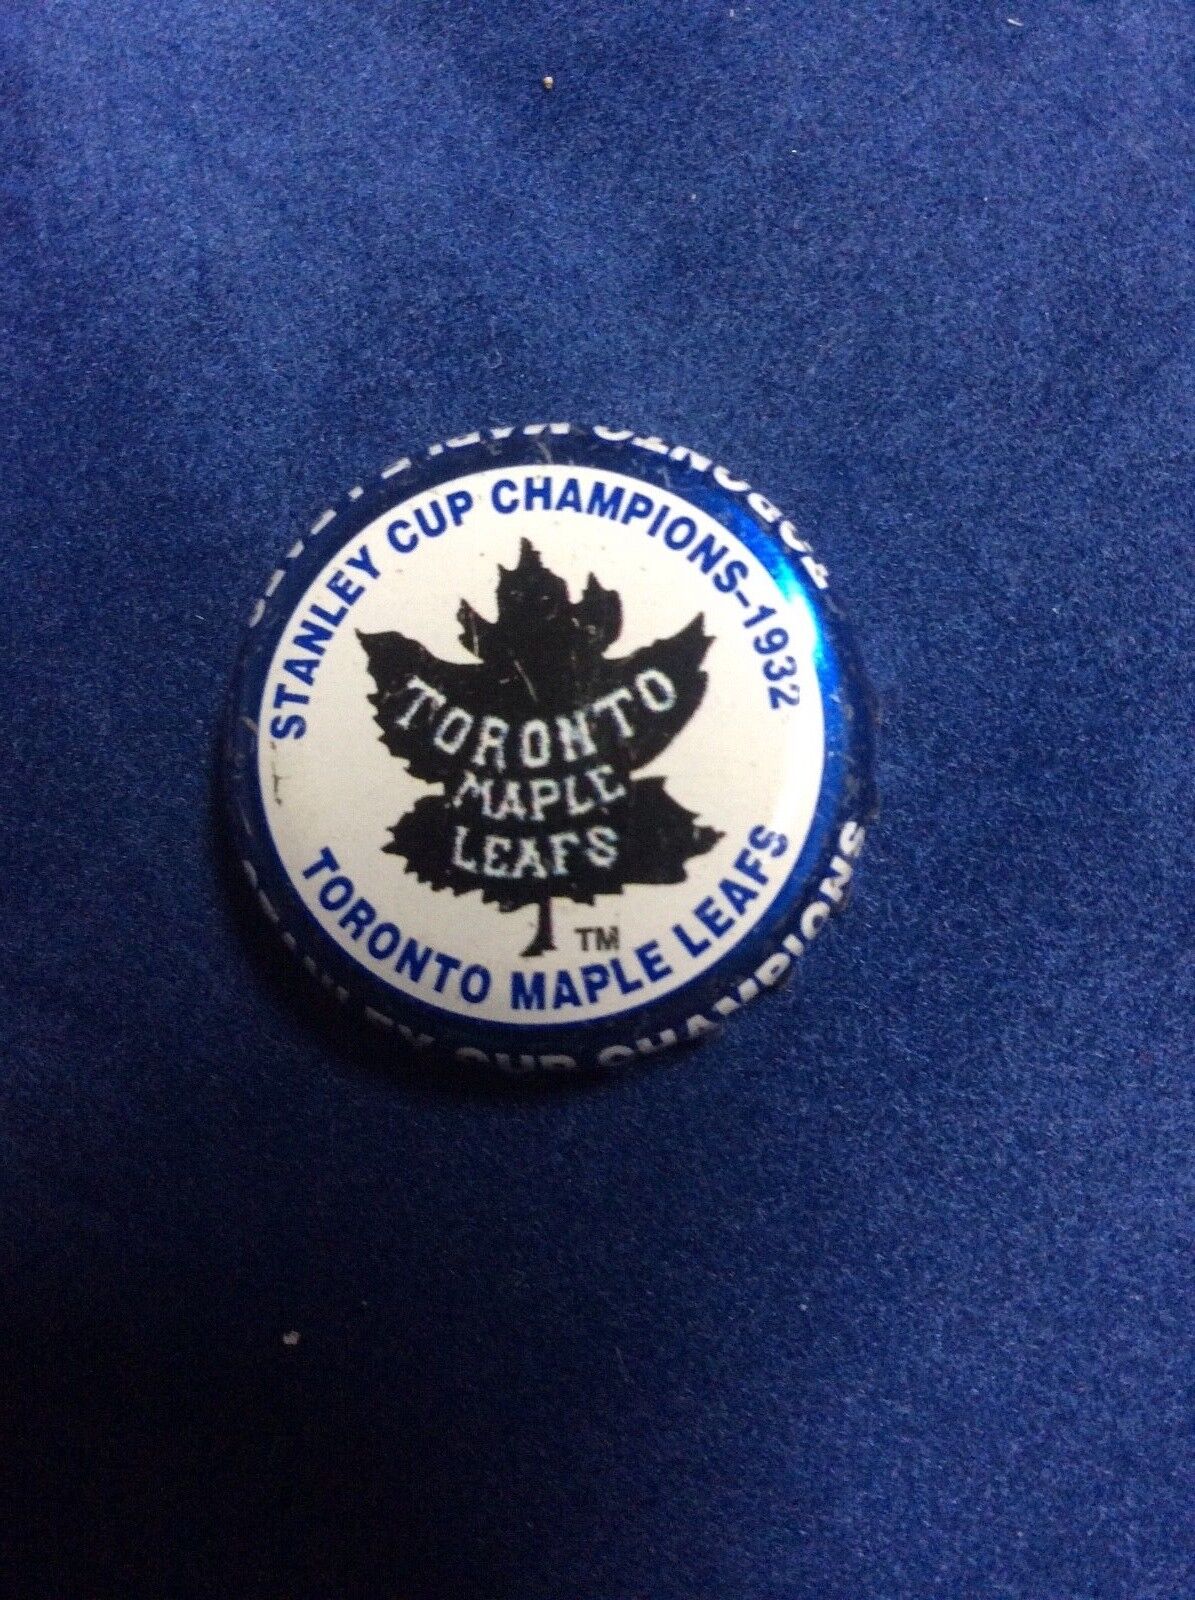 Stanley Cup Champ Toronto Maple Leafs 1932 Limited Edition Labatts Beer Cap 2001